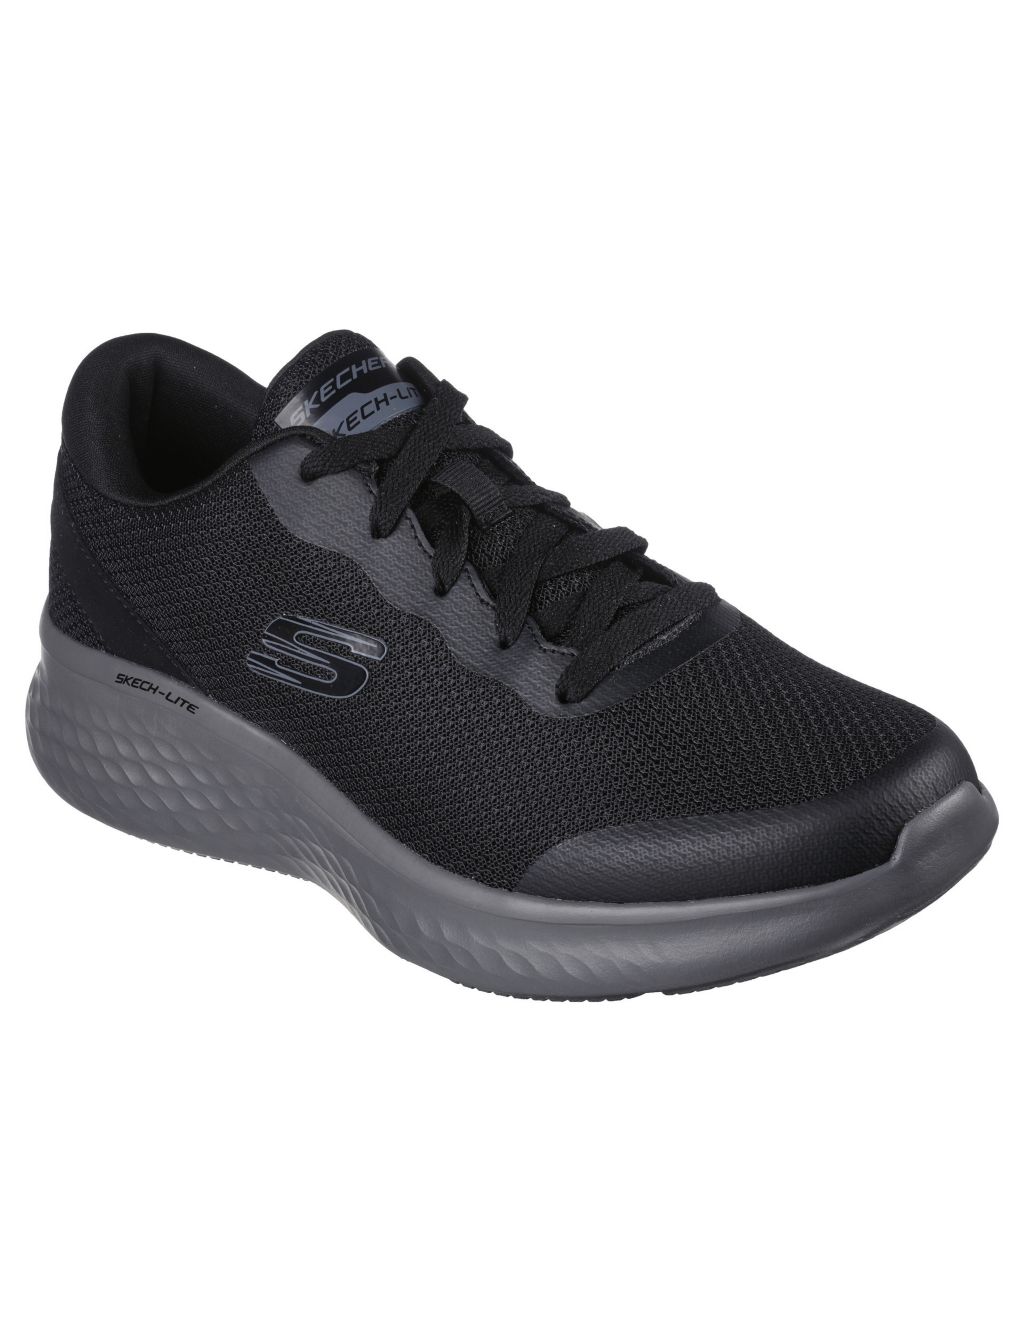 Skech-Lite Pro Clear Rush Lace Up Trainers image 3